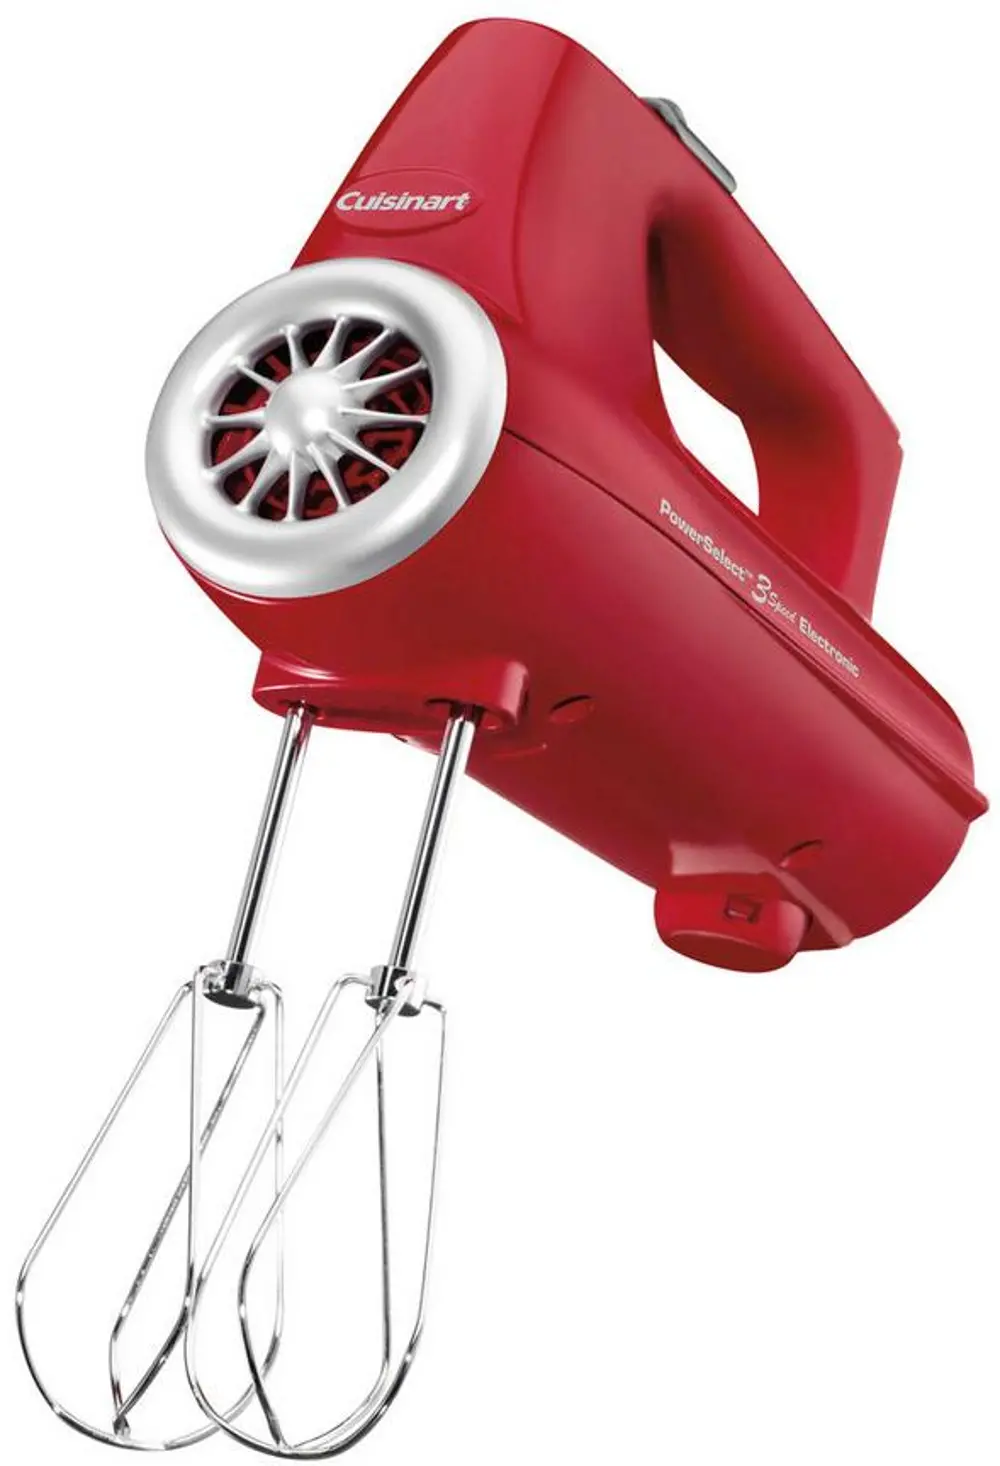 CHM-3R Red PowerSelect 3-Speed Cuisinart Hand Mixer-1